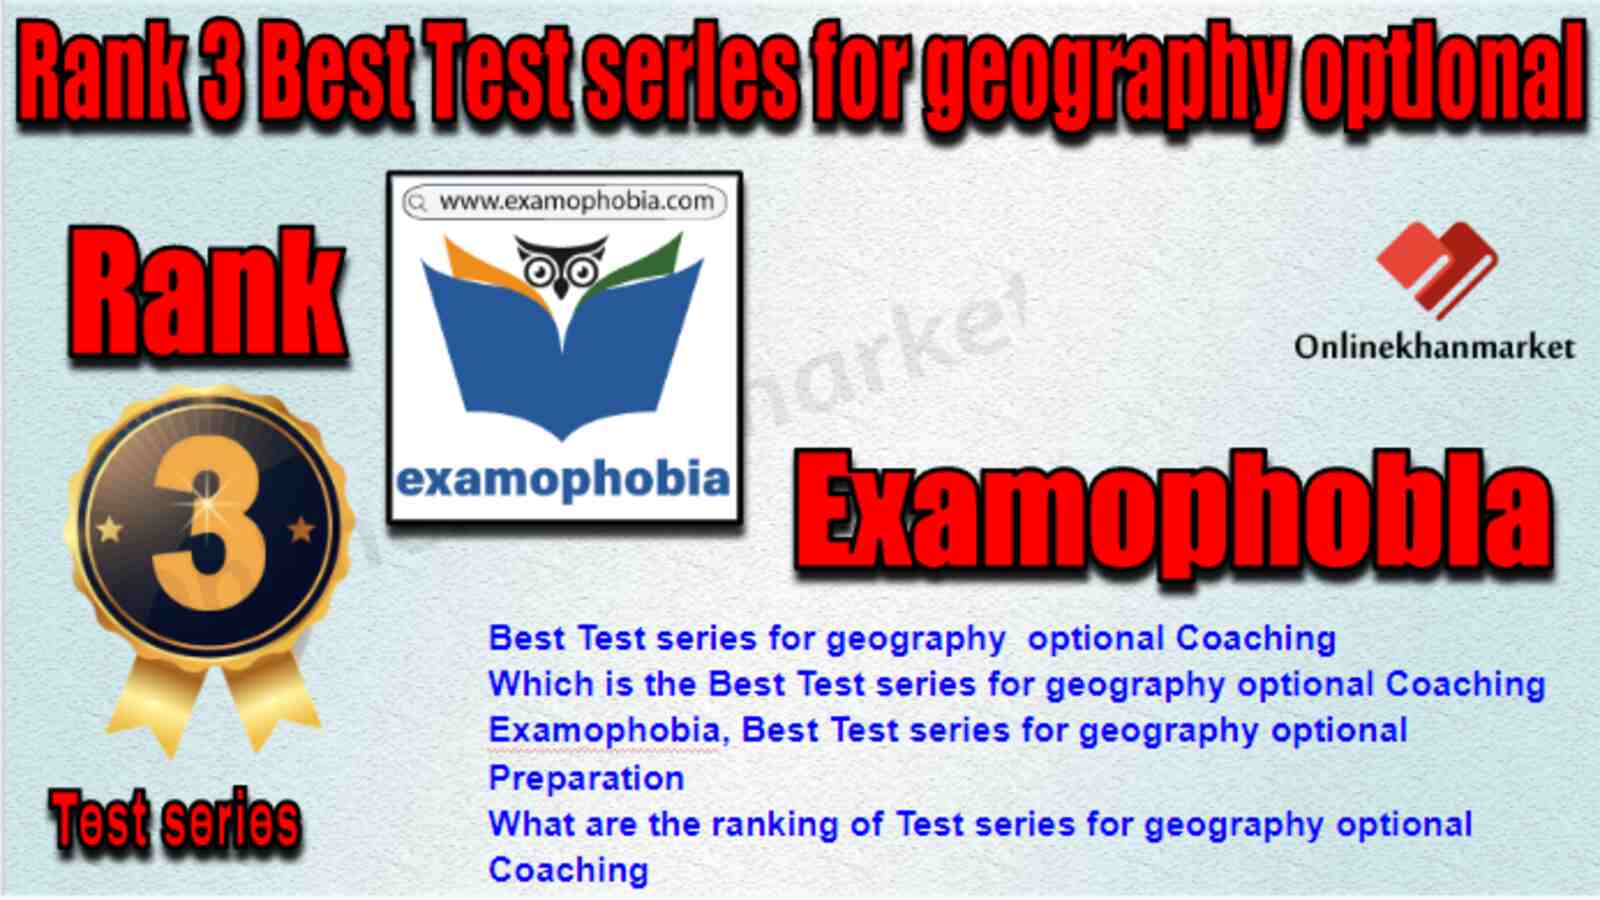 Rank 3 Best Test series for geography optional